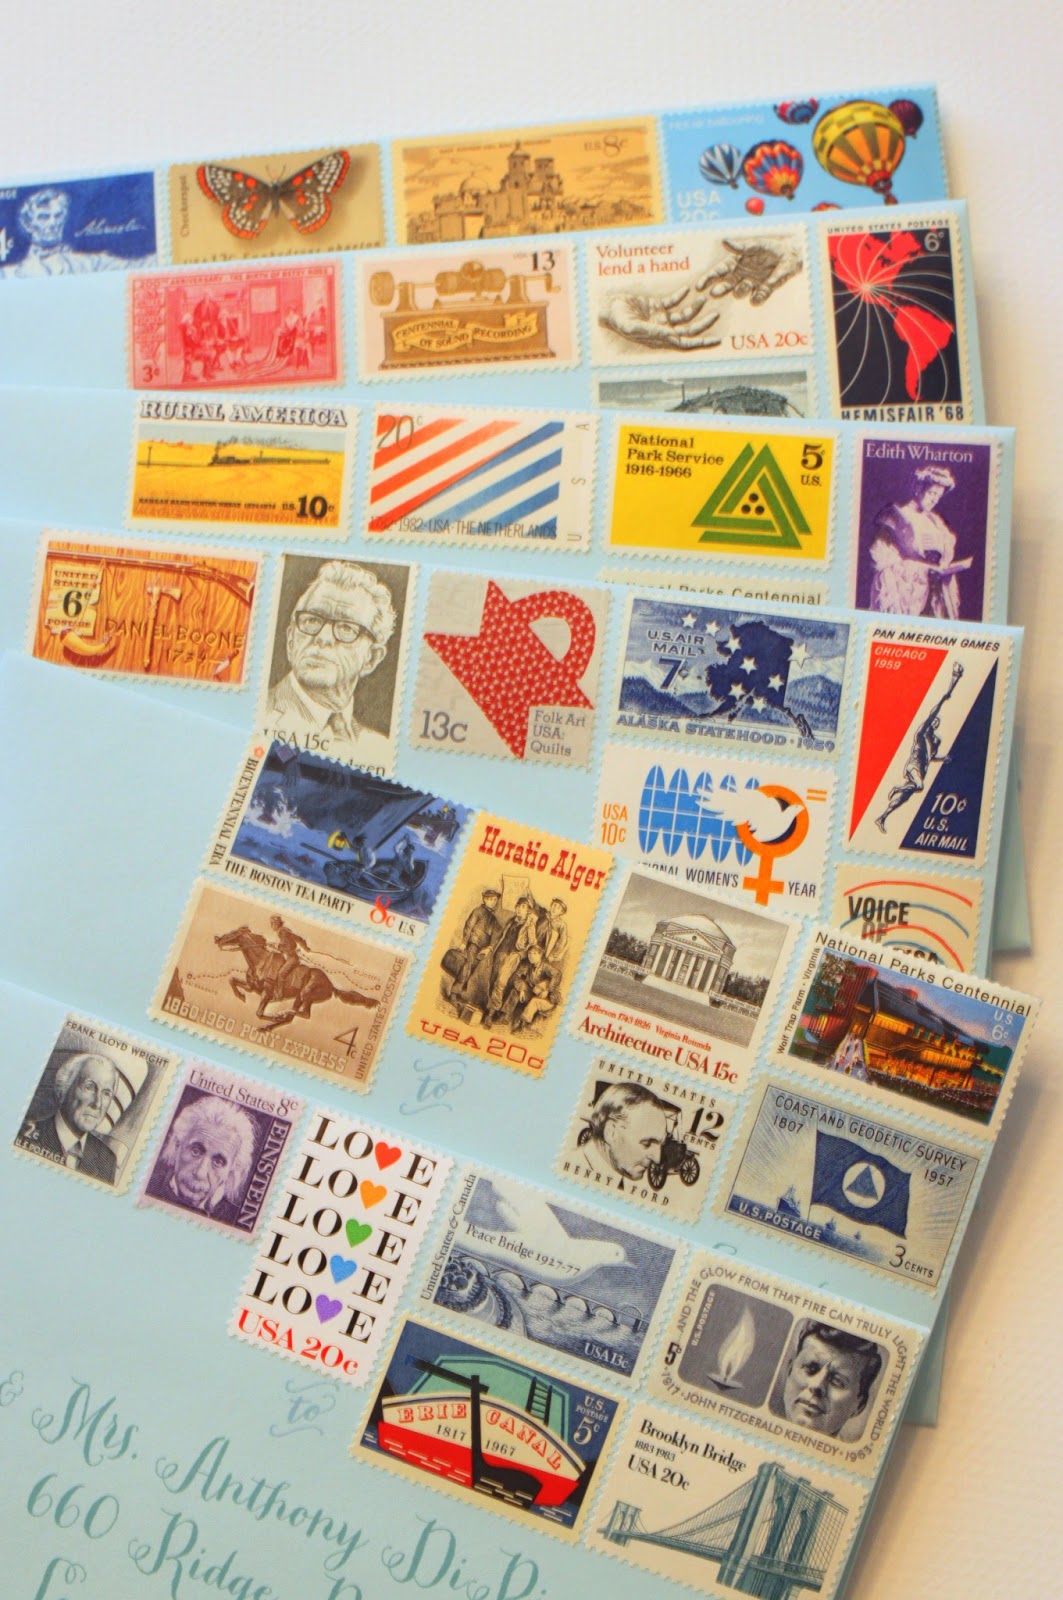 Why Were Postage Stamps Invented, And Why Do People Collect Them?